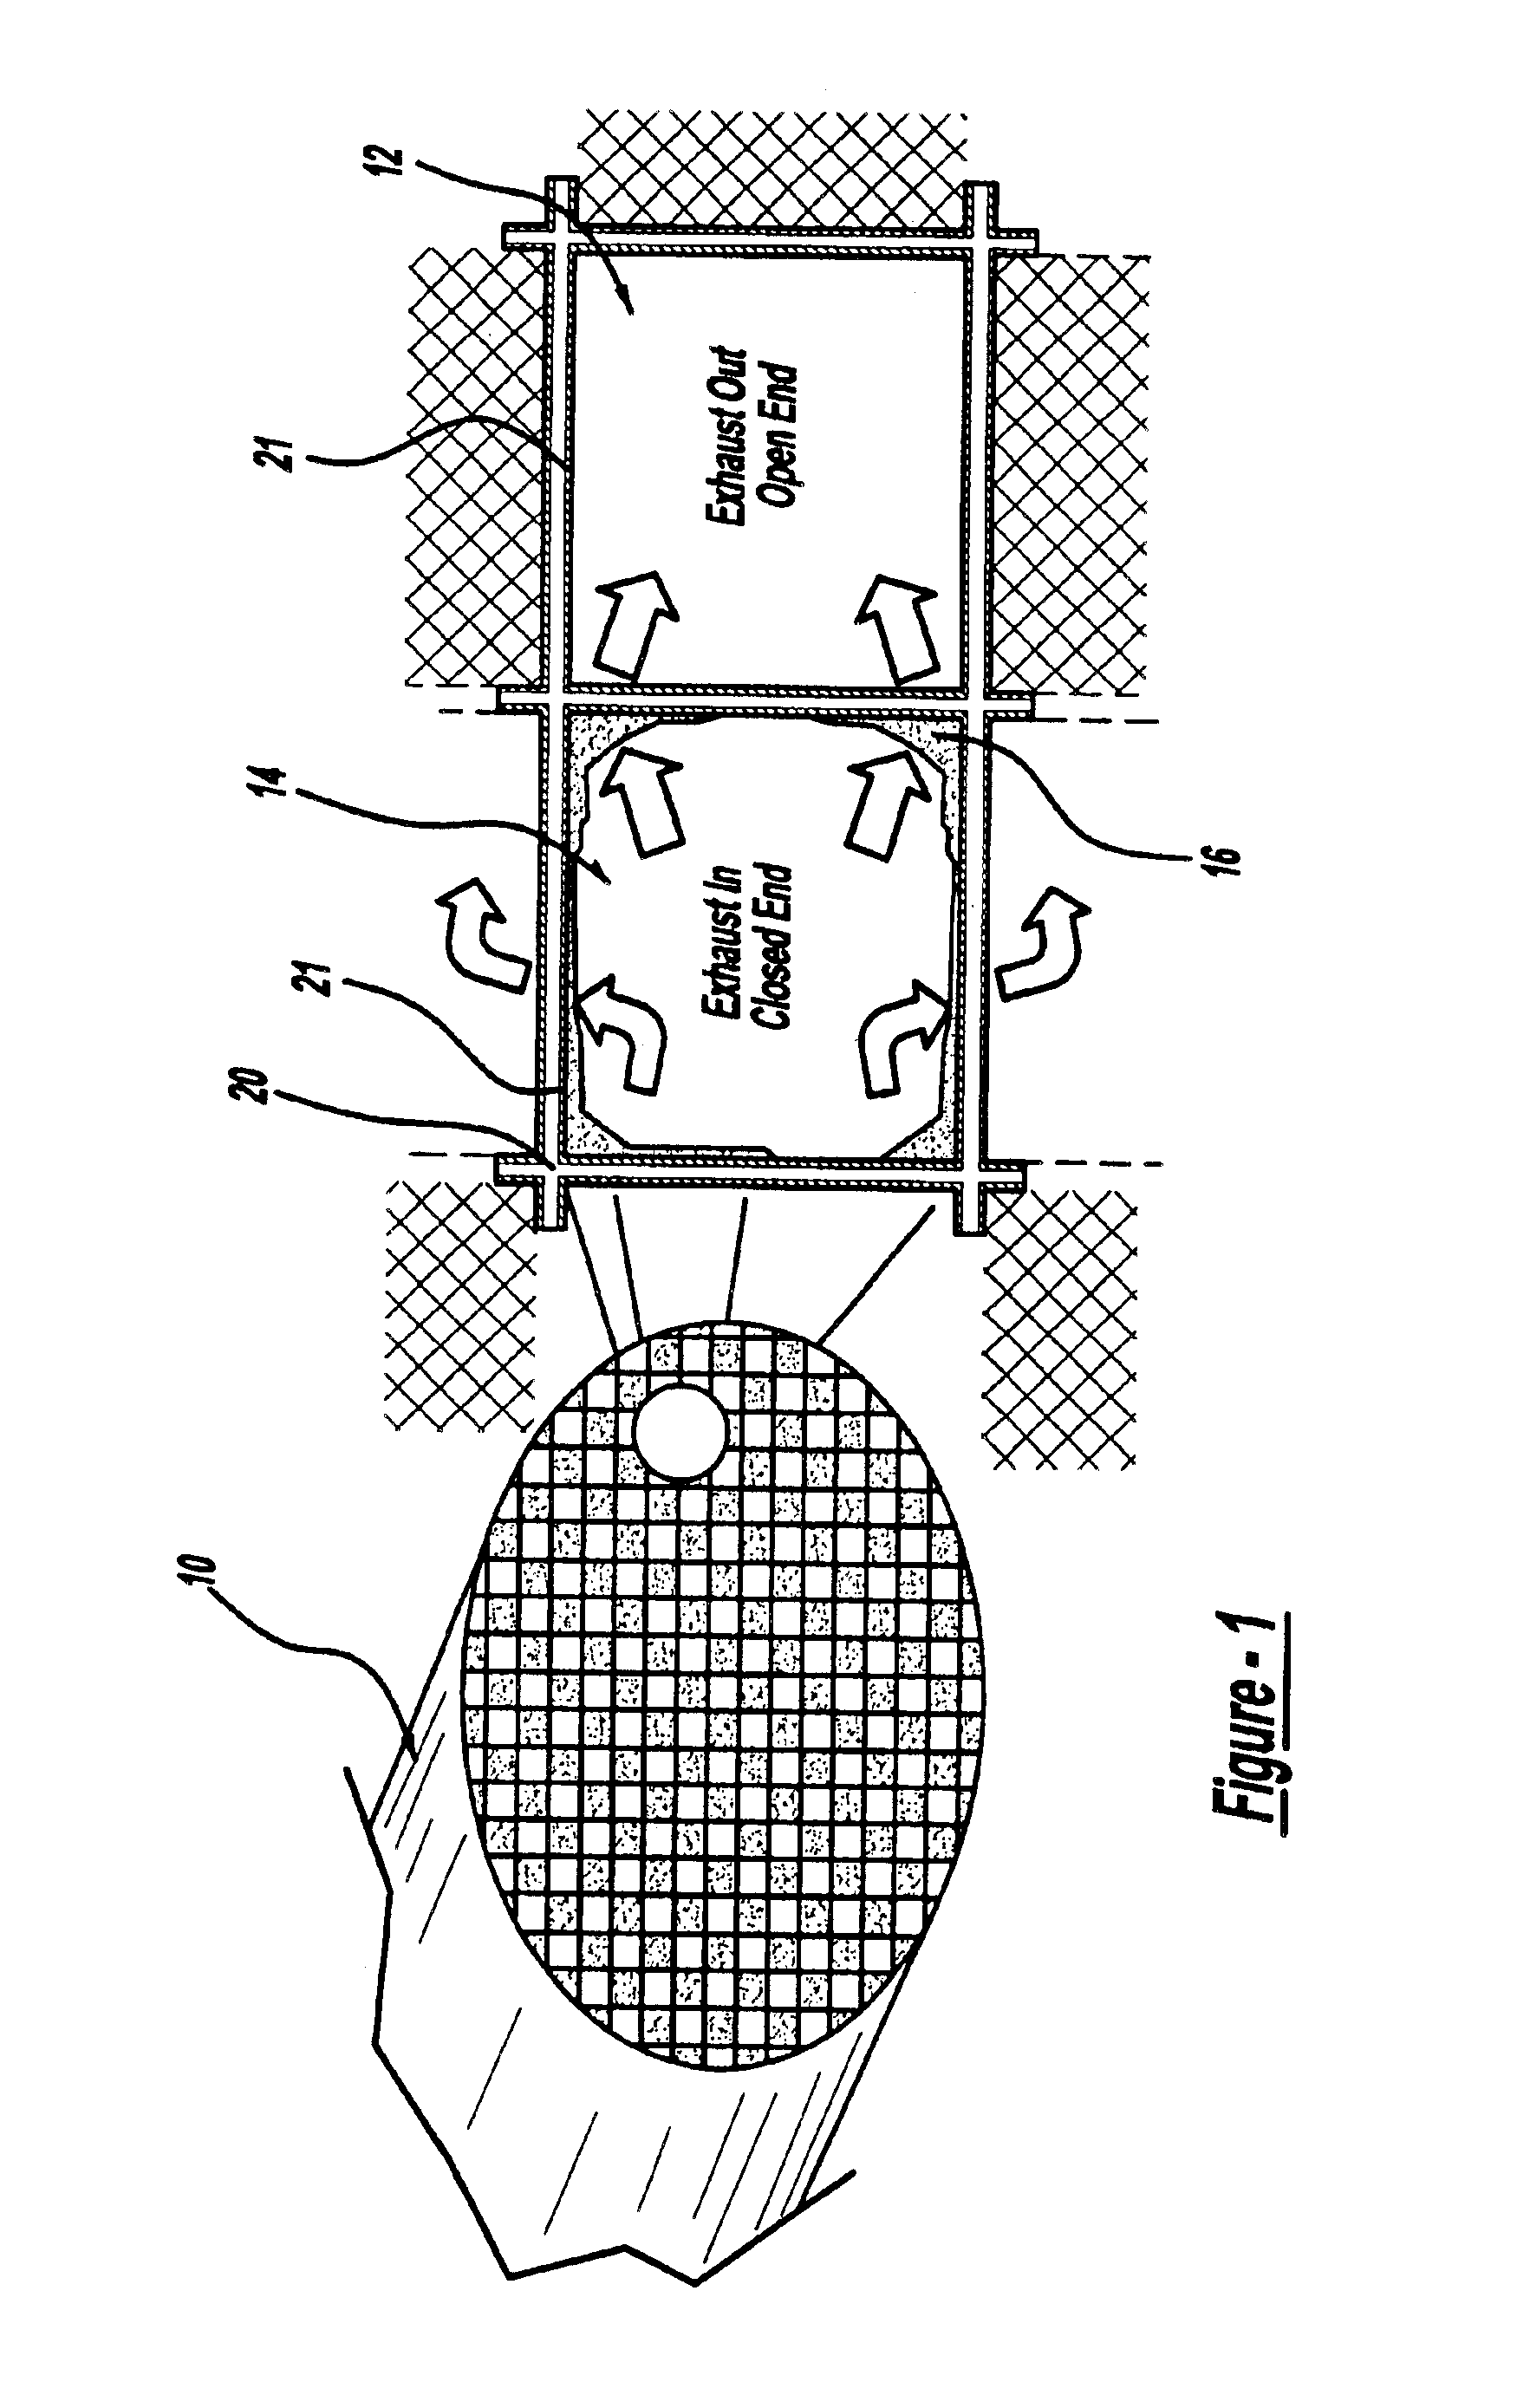 Self-mode-stirred microwave heating for a particulate trap